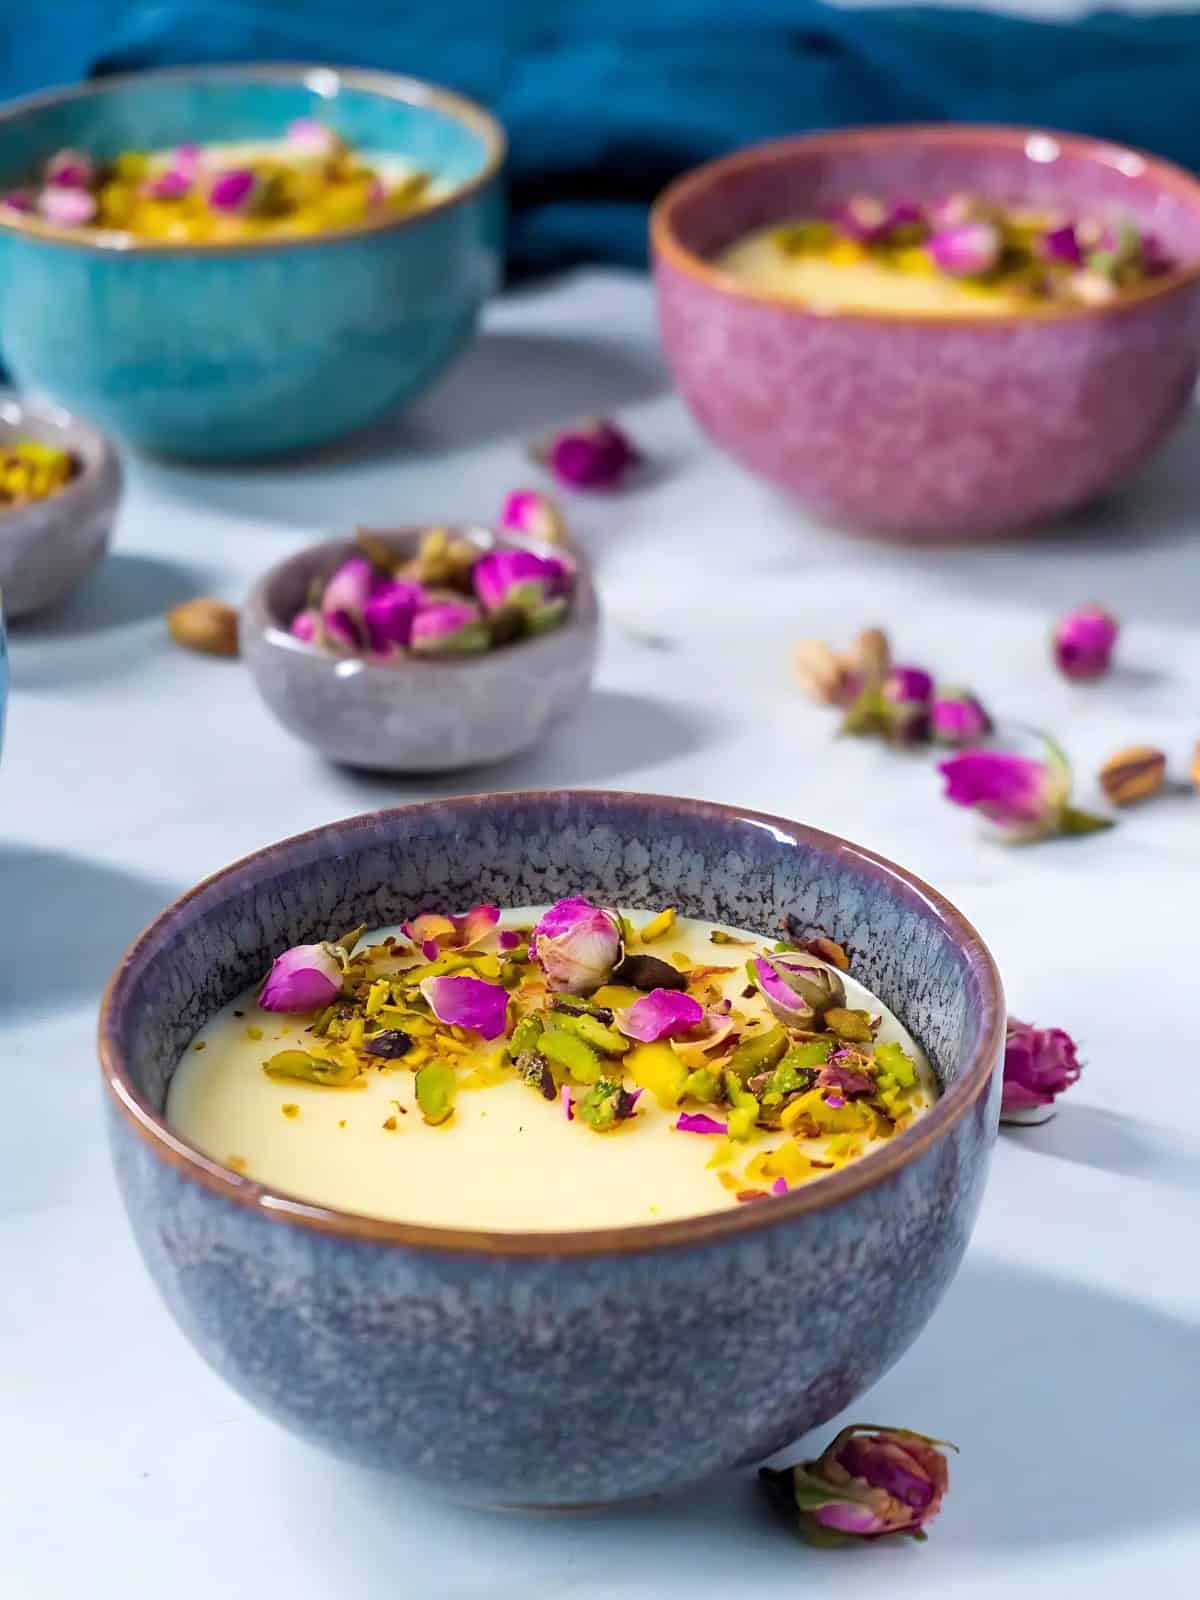 Milk pudding in a porcelain glass bowl topped with fresh flower petals.